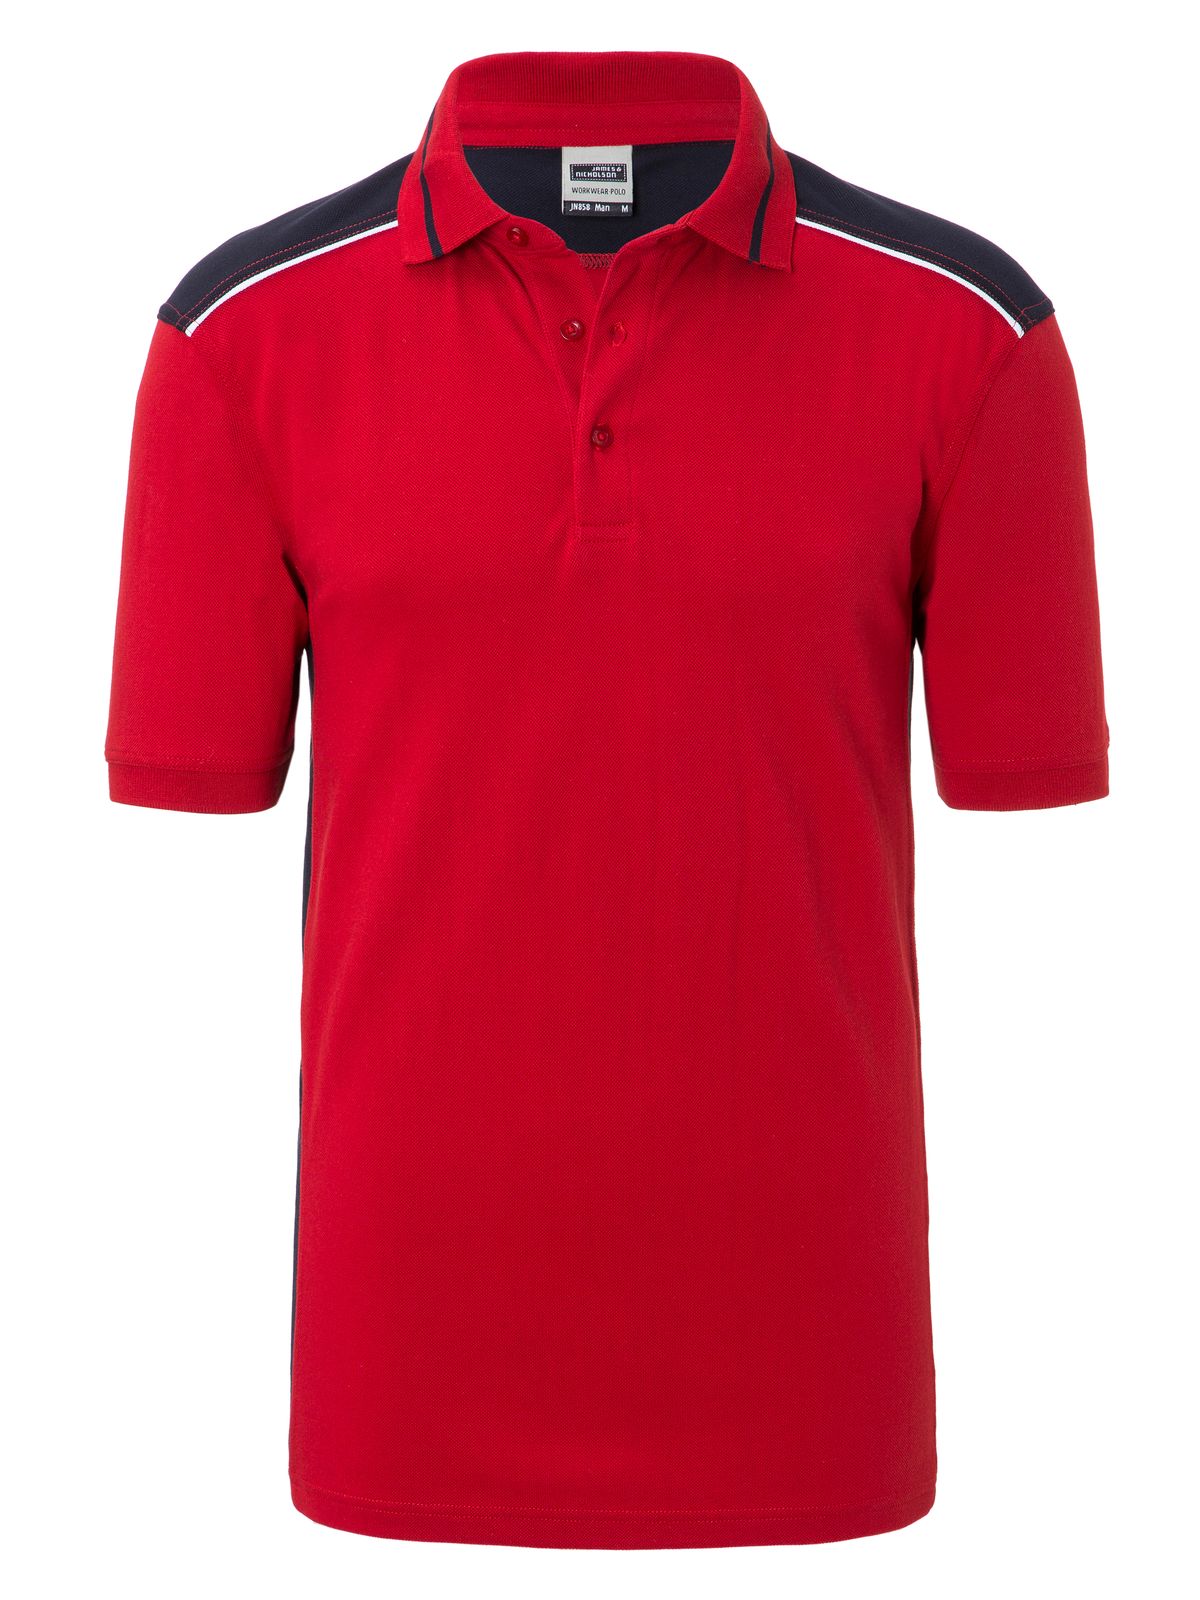 mens-workwear-polo-color-red-navy.webp